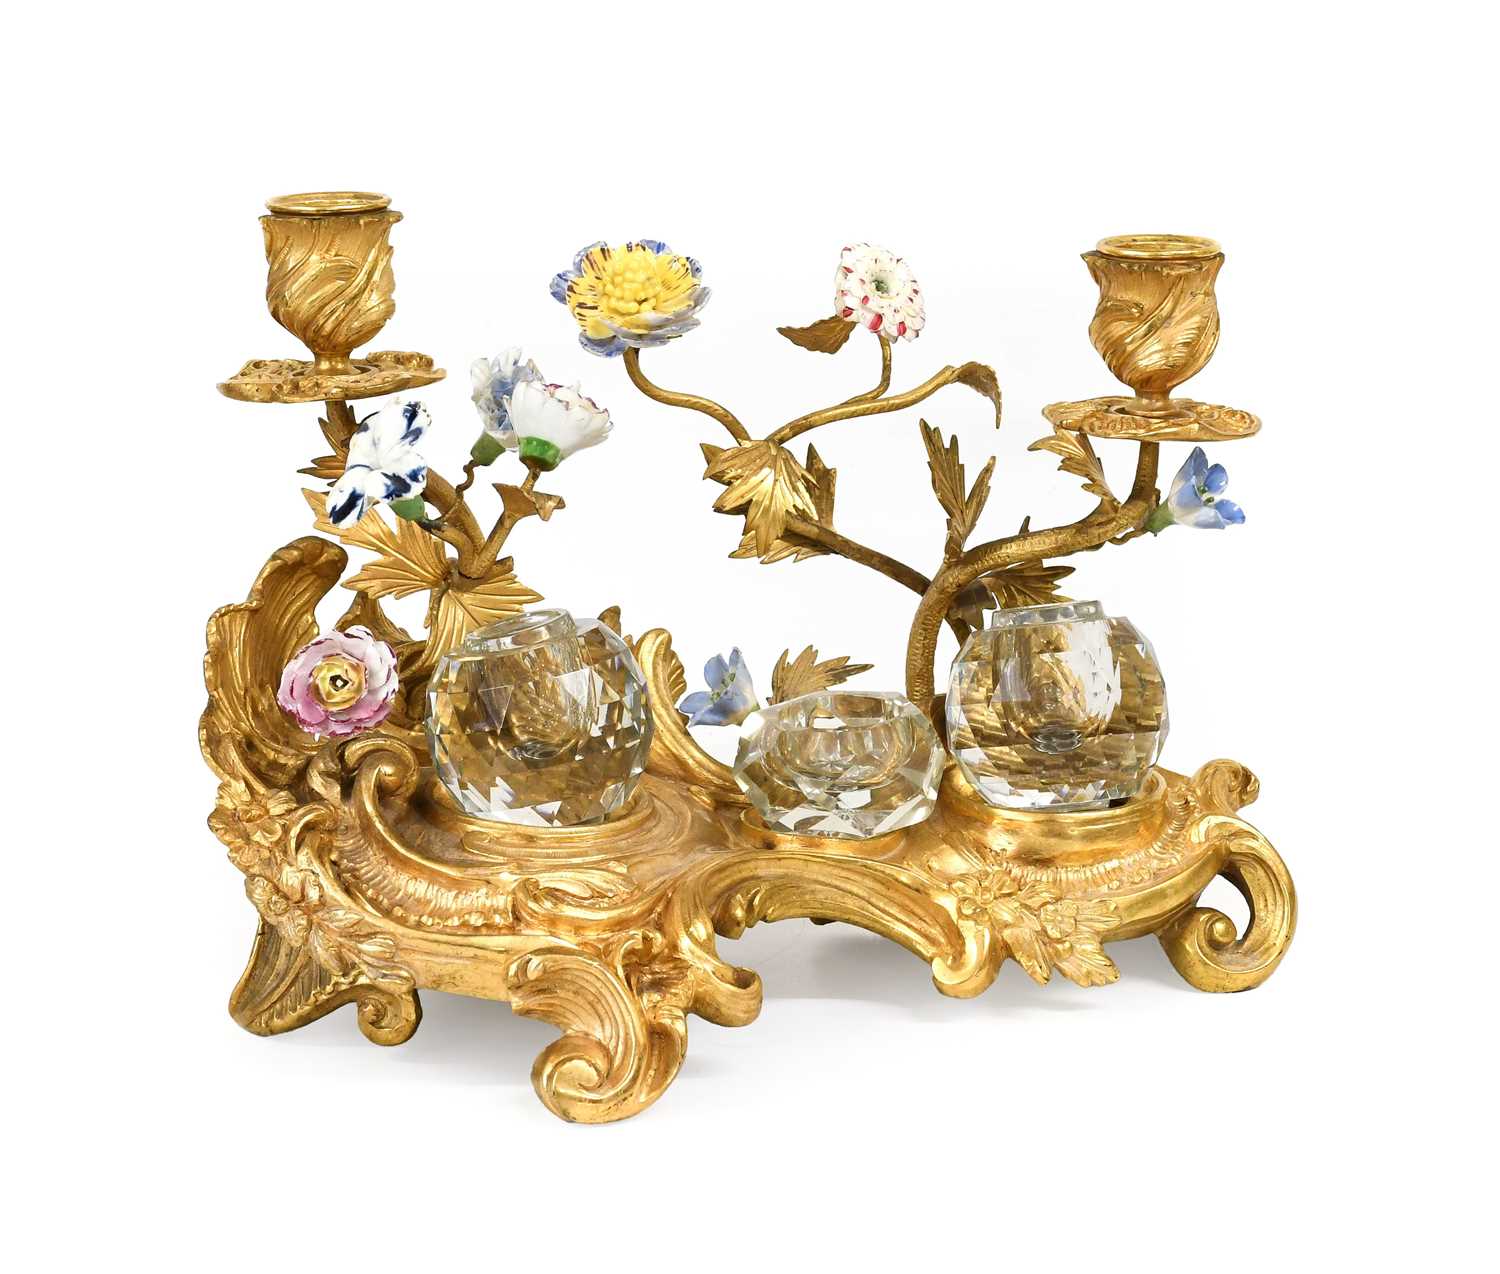 A French Gilt-Bronze Inkstand, in Louis XV style, with two leaf-sheathed sconces on leafy tendrils